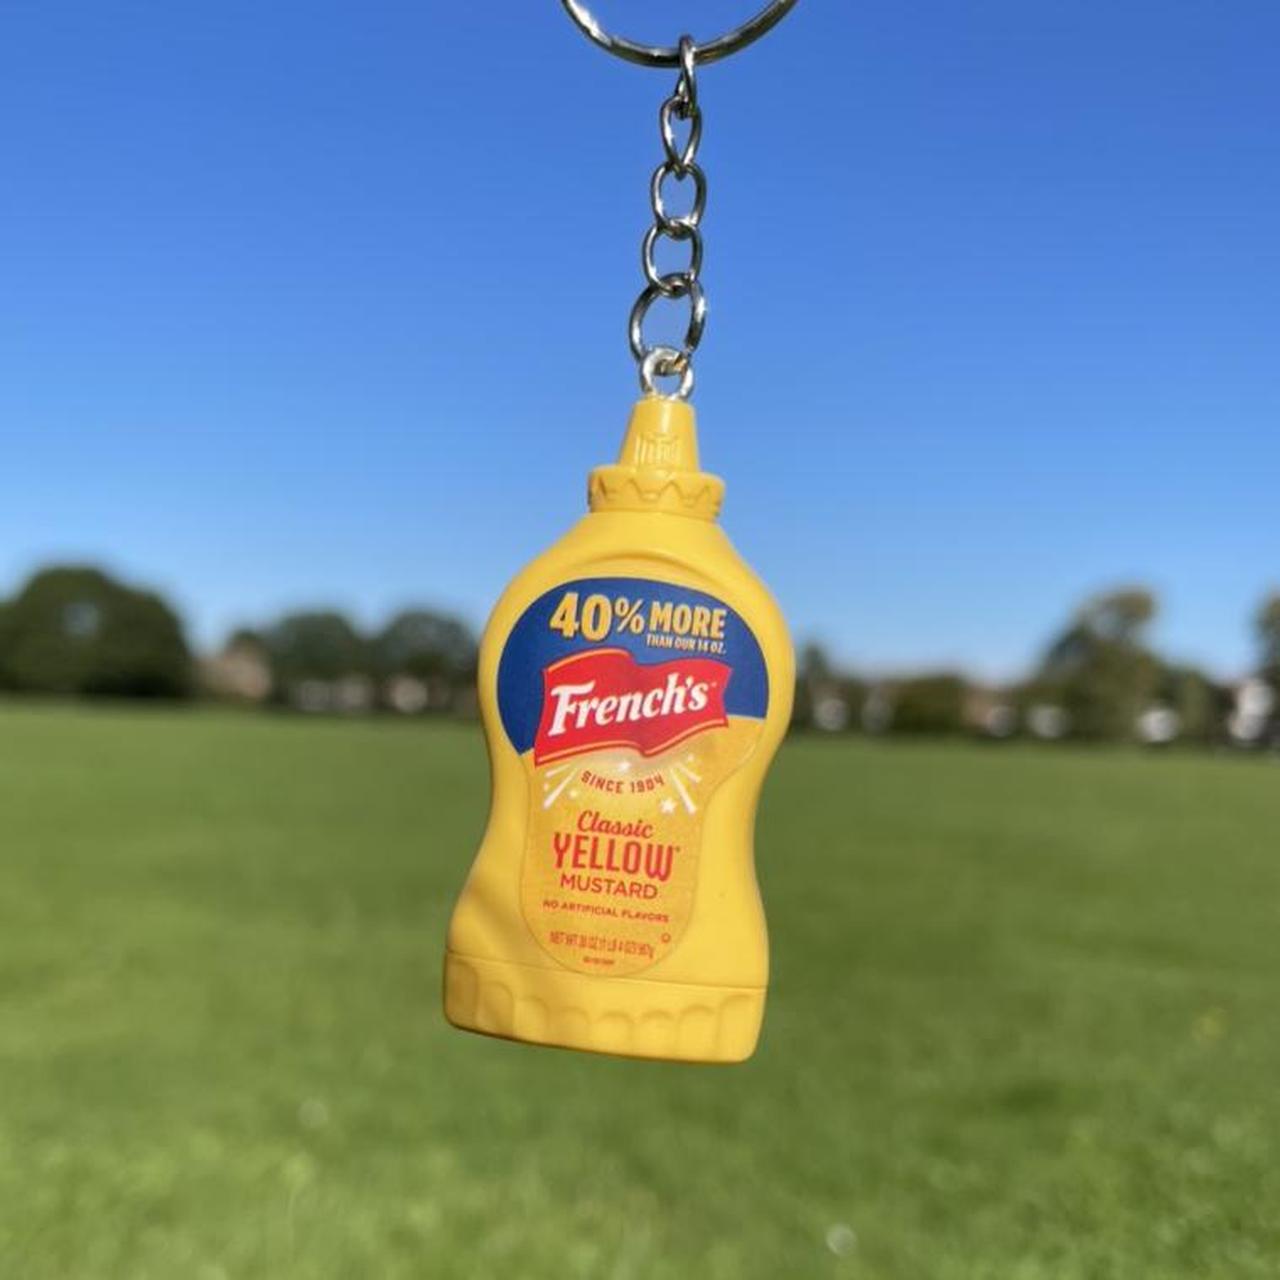 Product Image 1 - Calling all mustard lovers!! ☀️

French’s